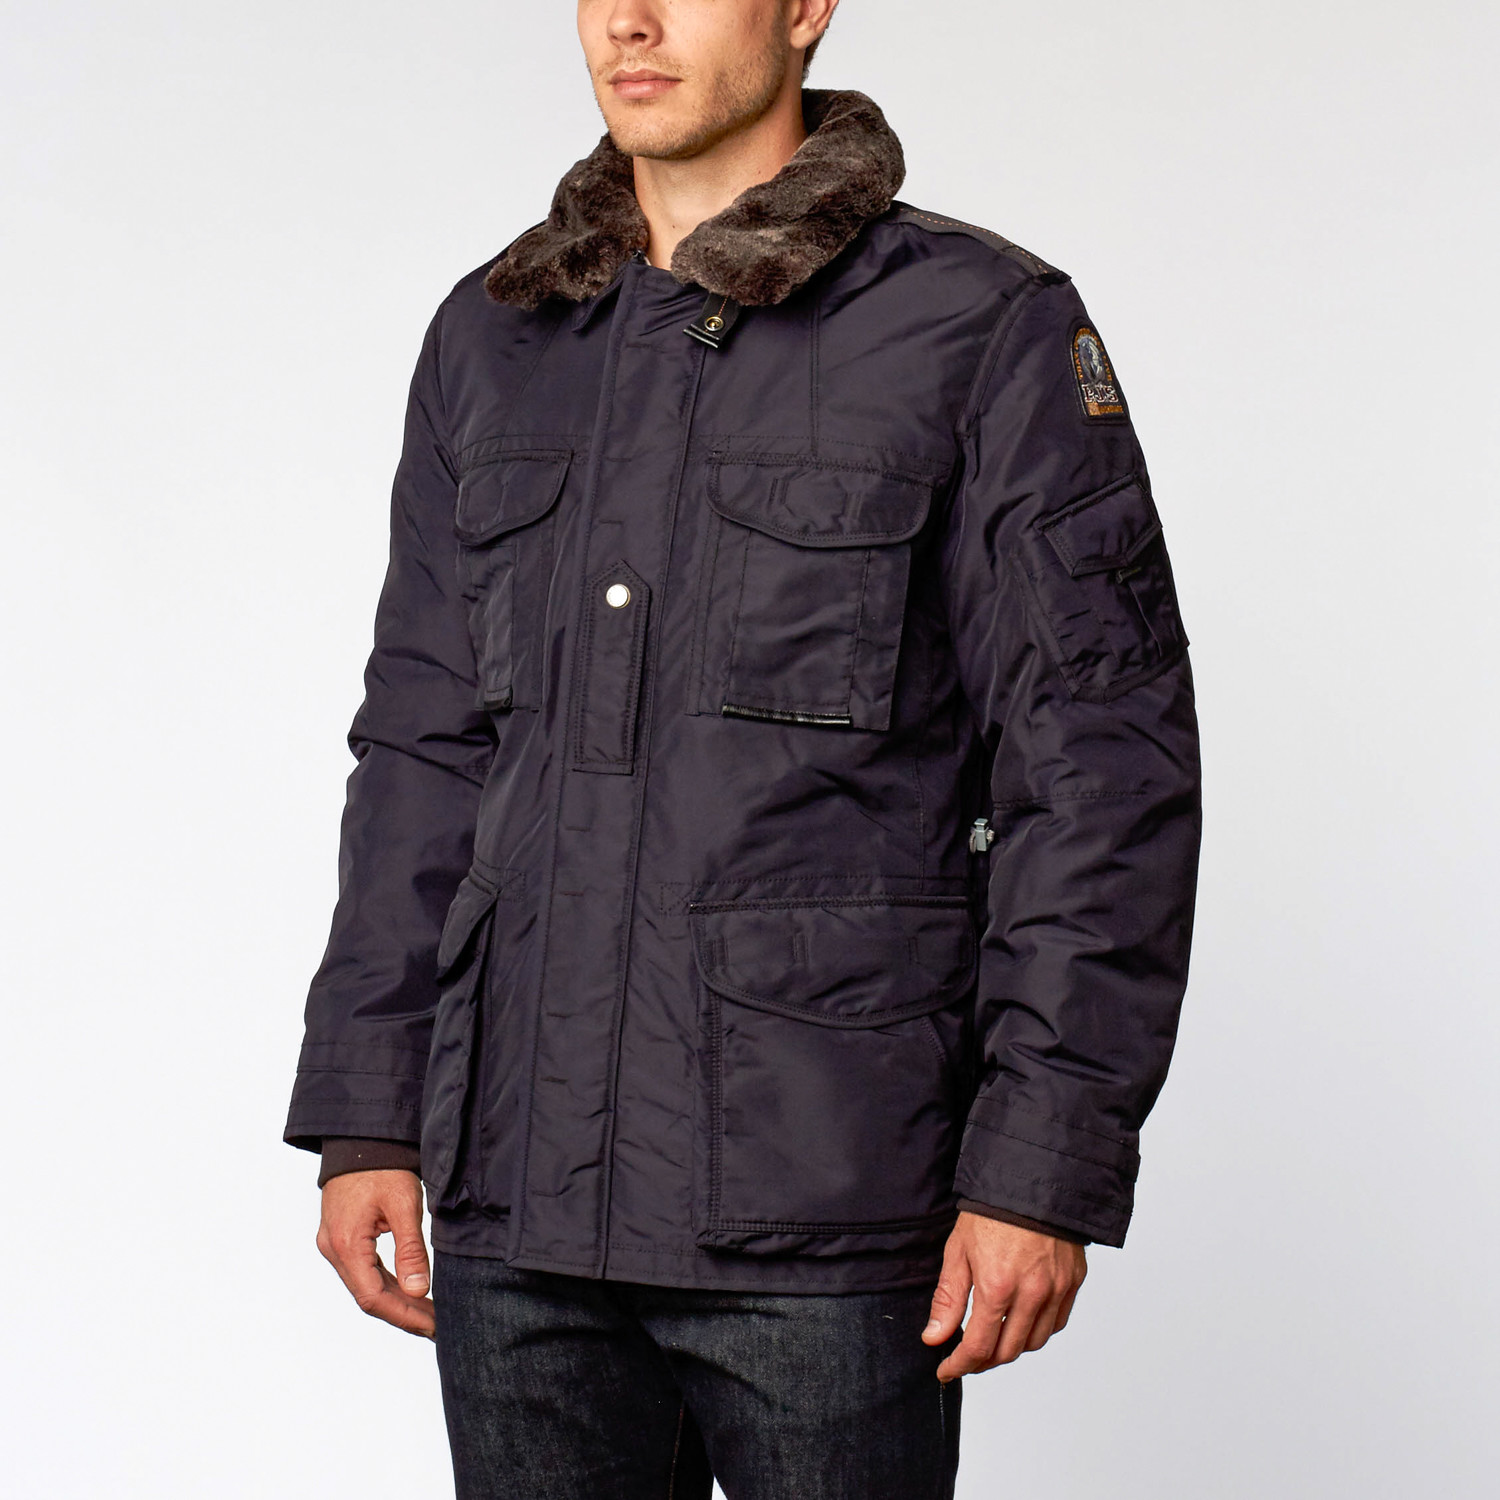 parajumpers field jacket